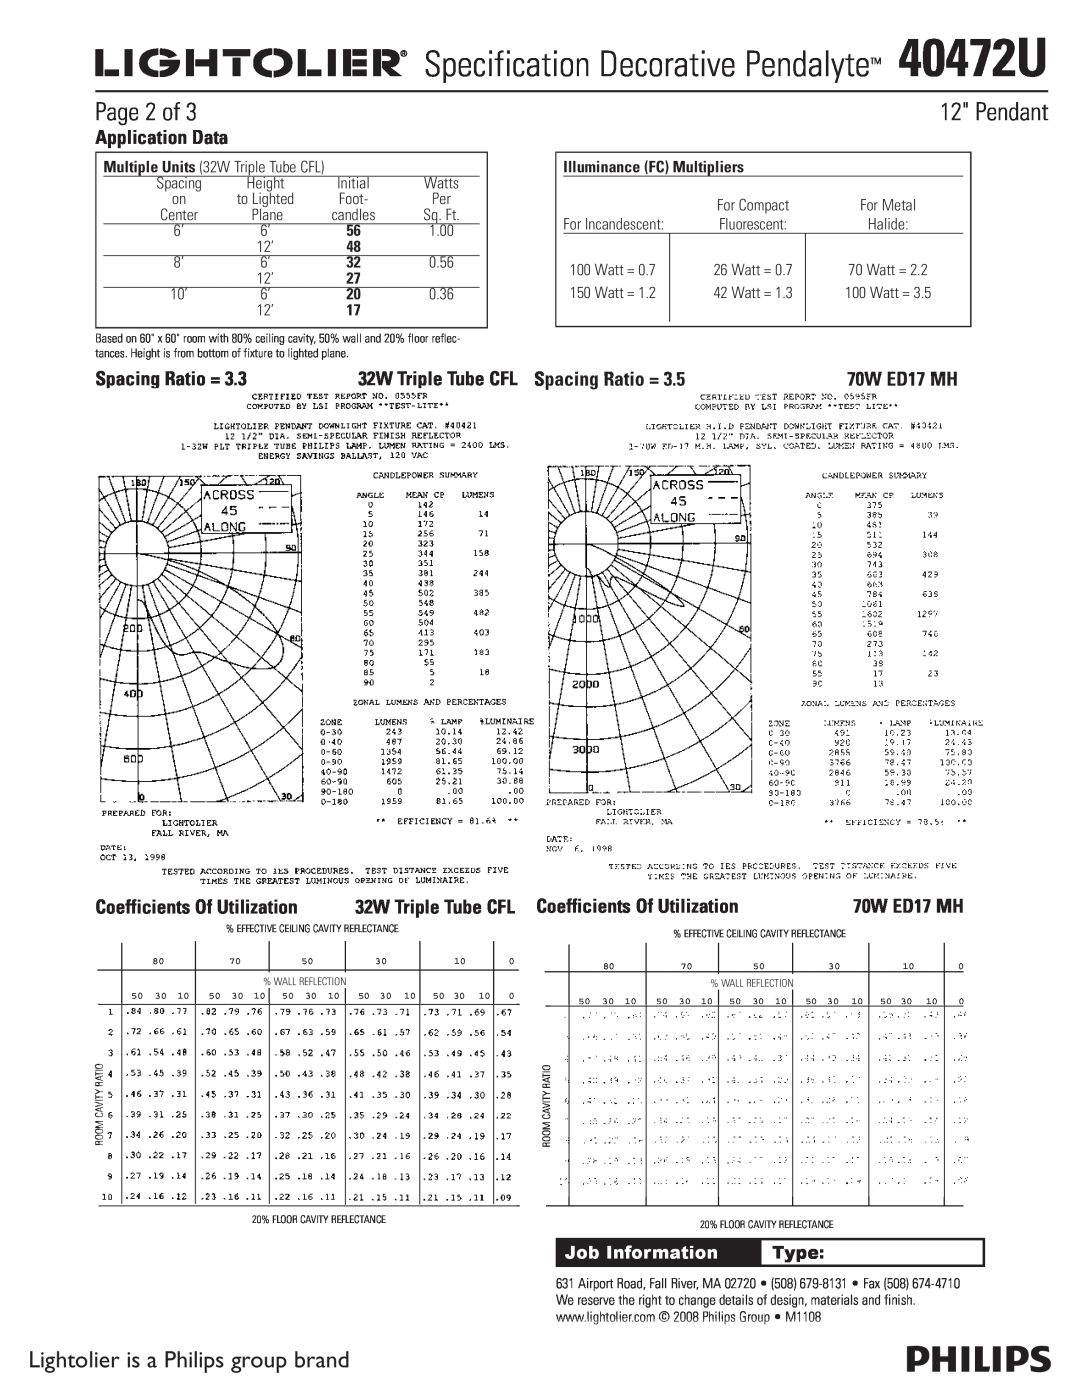 Lightolier Specification Decorative Pendalyte 40472U, Page 2 of, Application Data, Spacing Ratio =, Type, Plane, Watts 